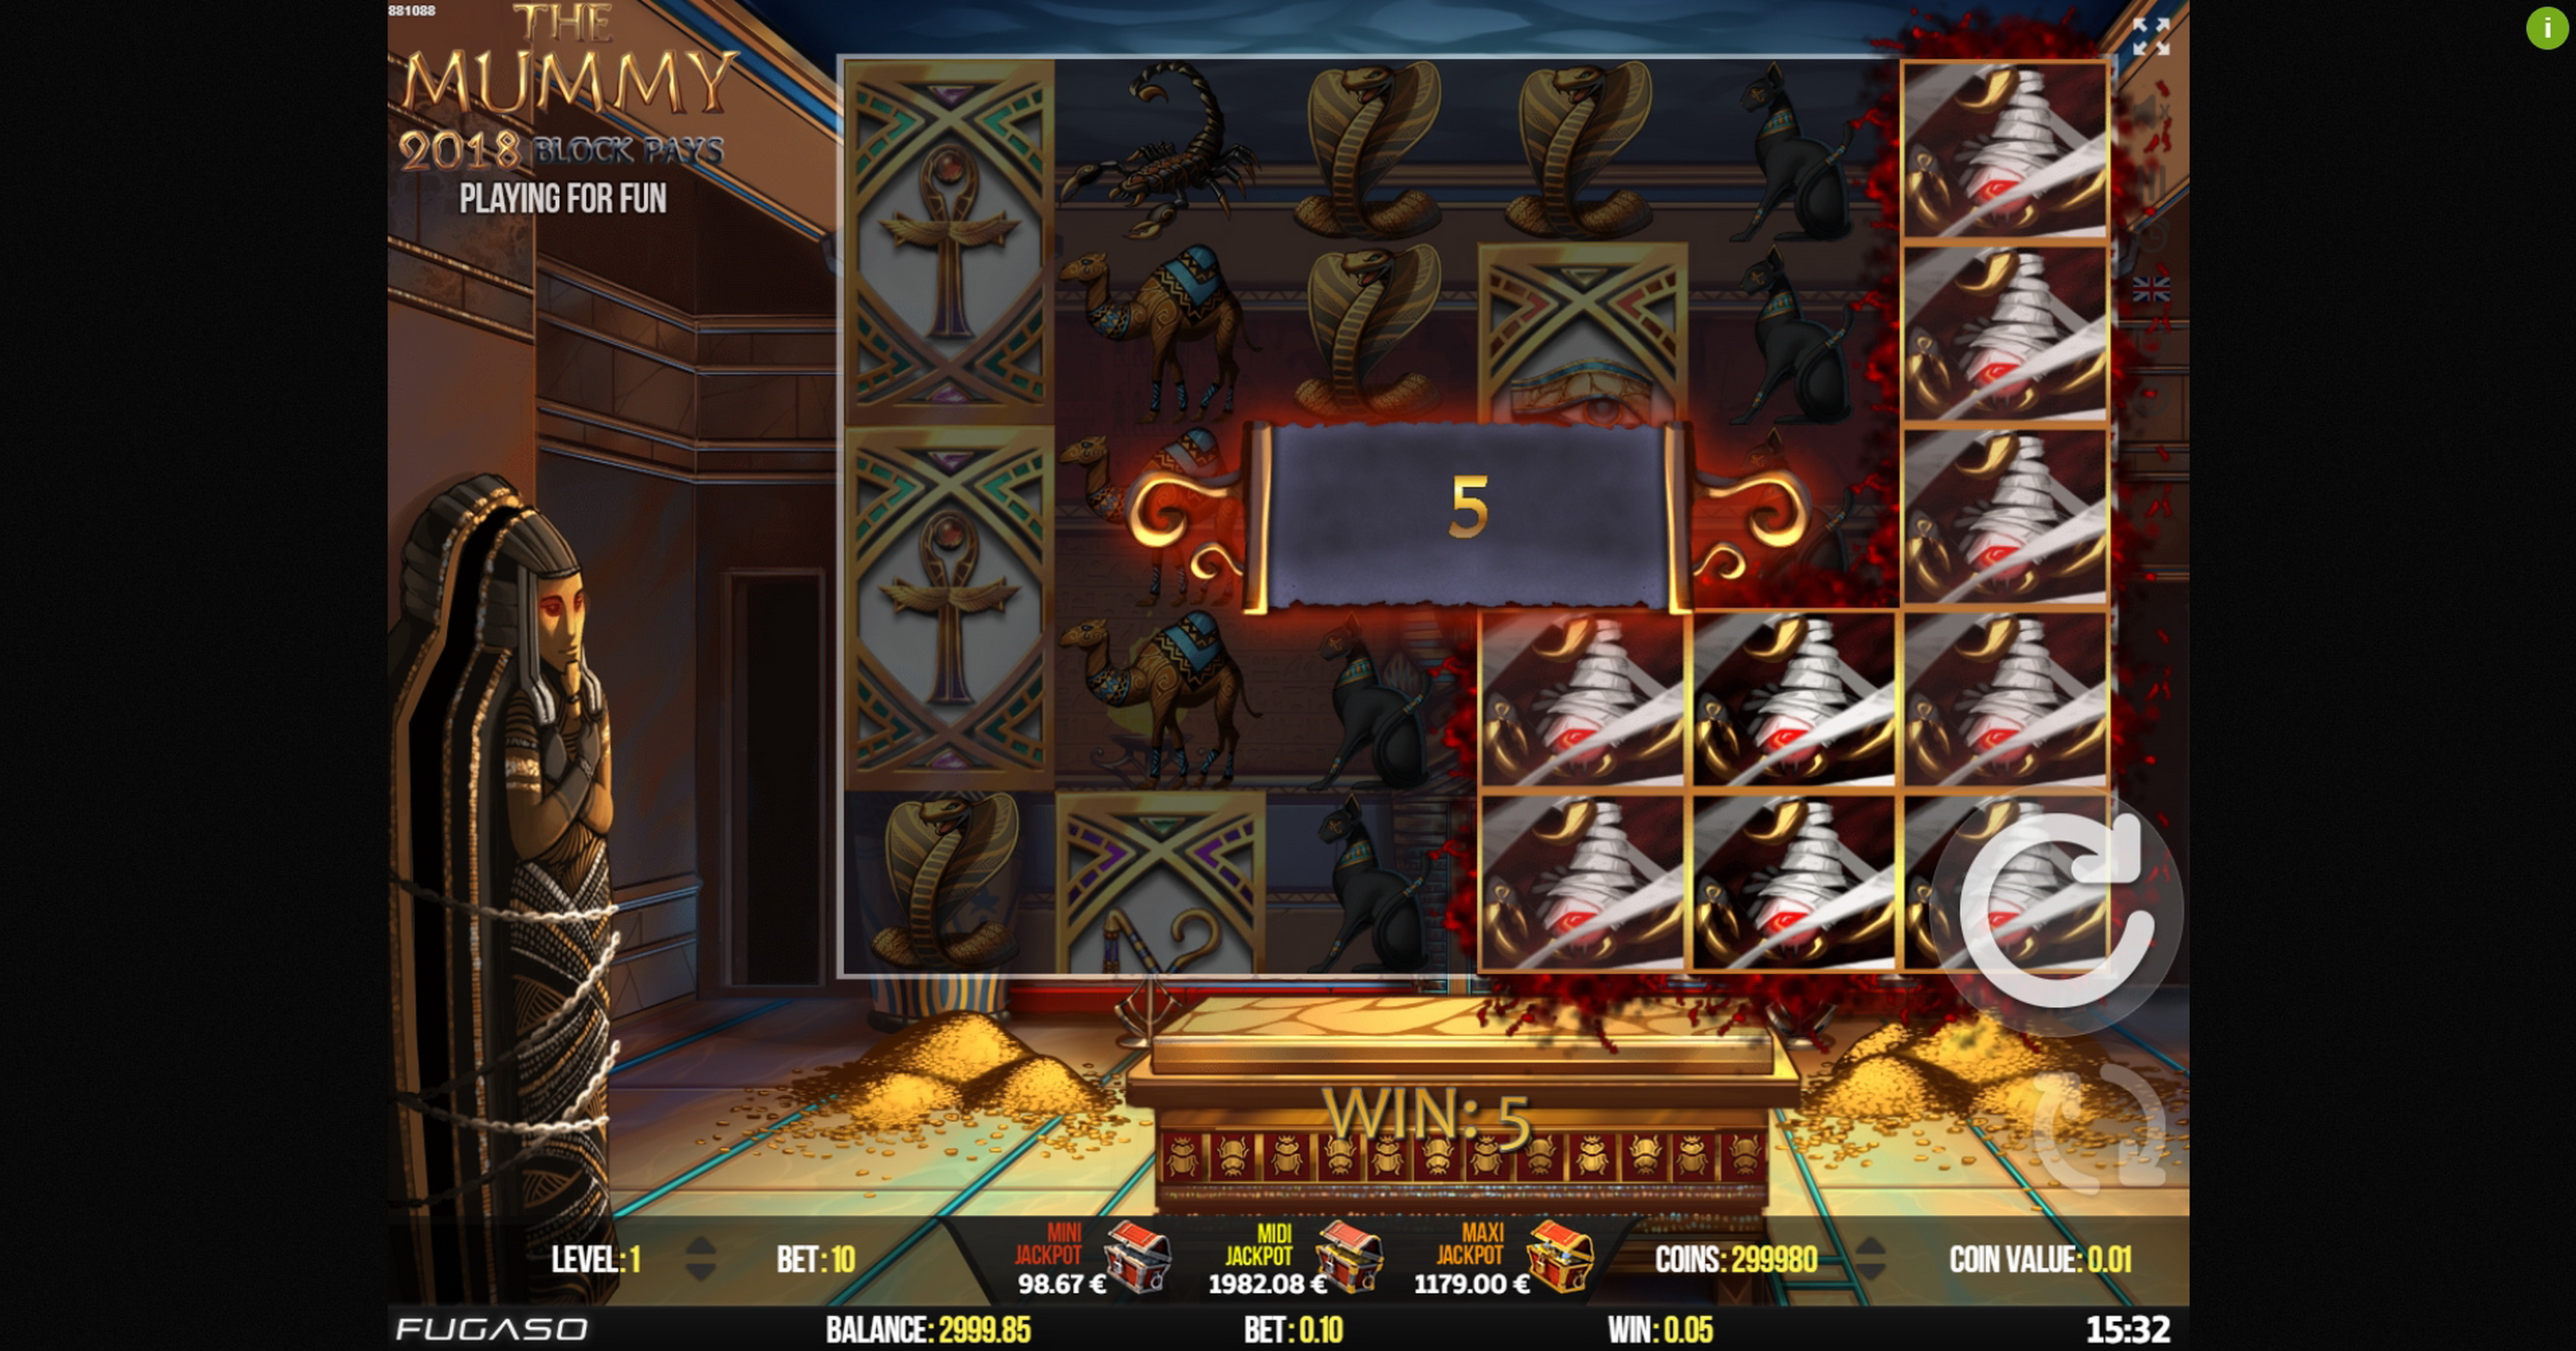 Win Money in The Mummy 2018 Free Slot Game by Fugaso